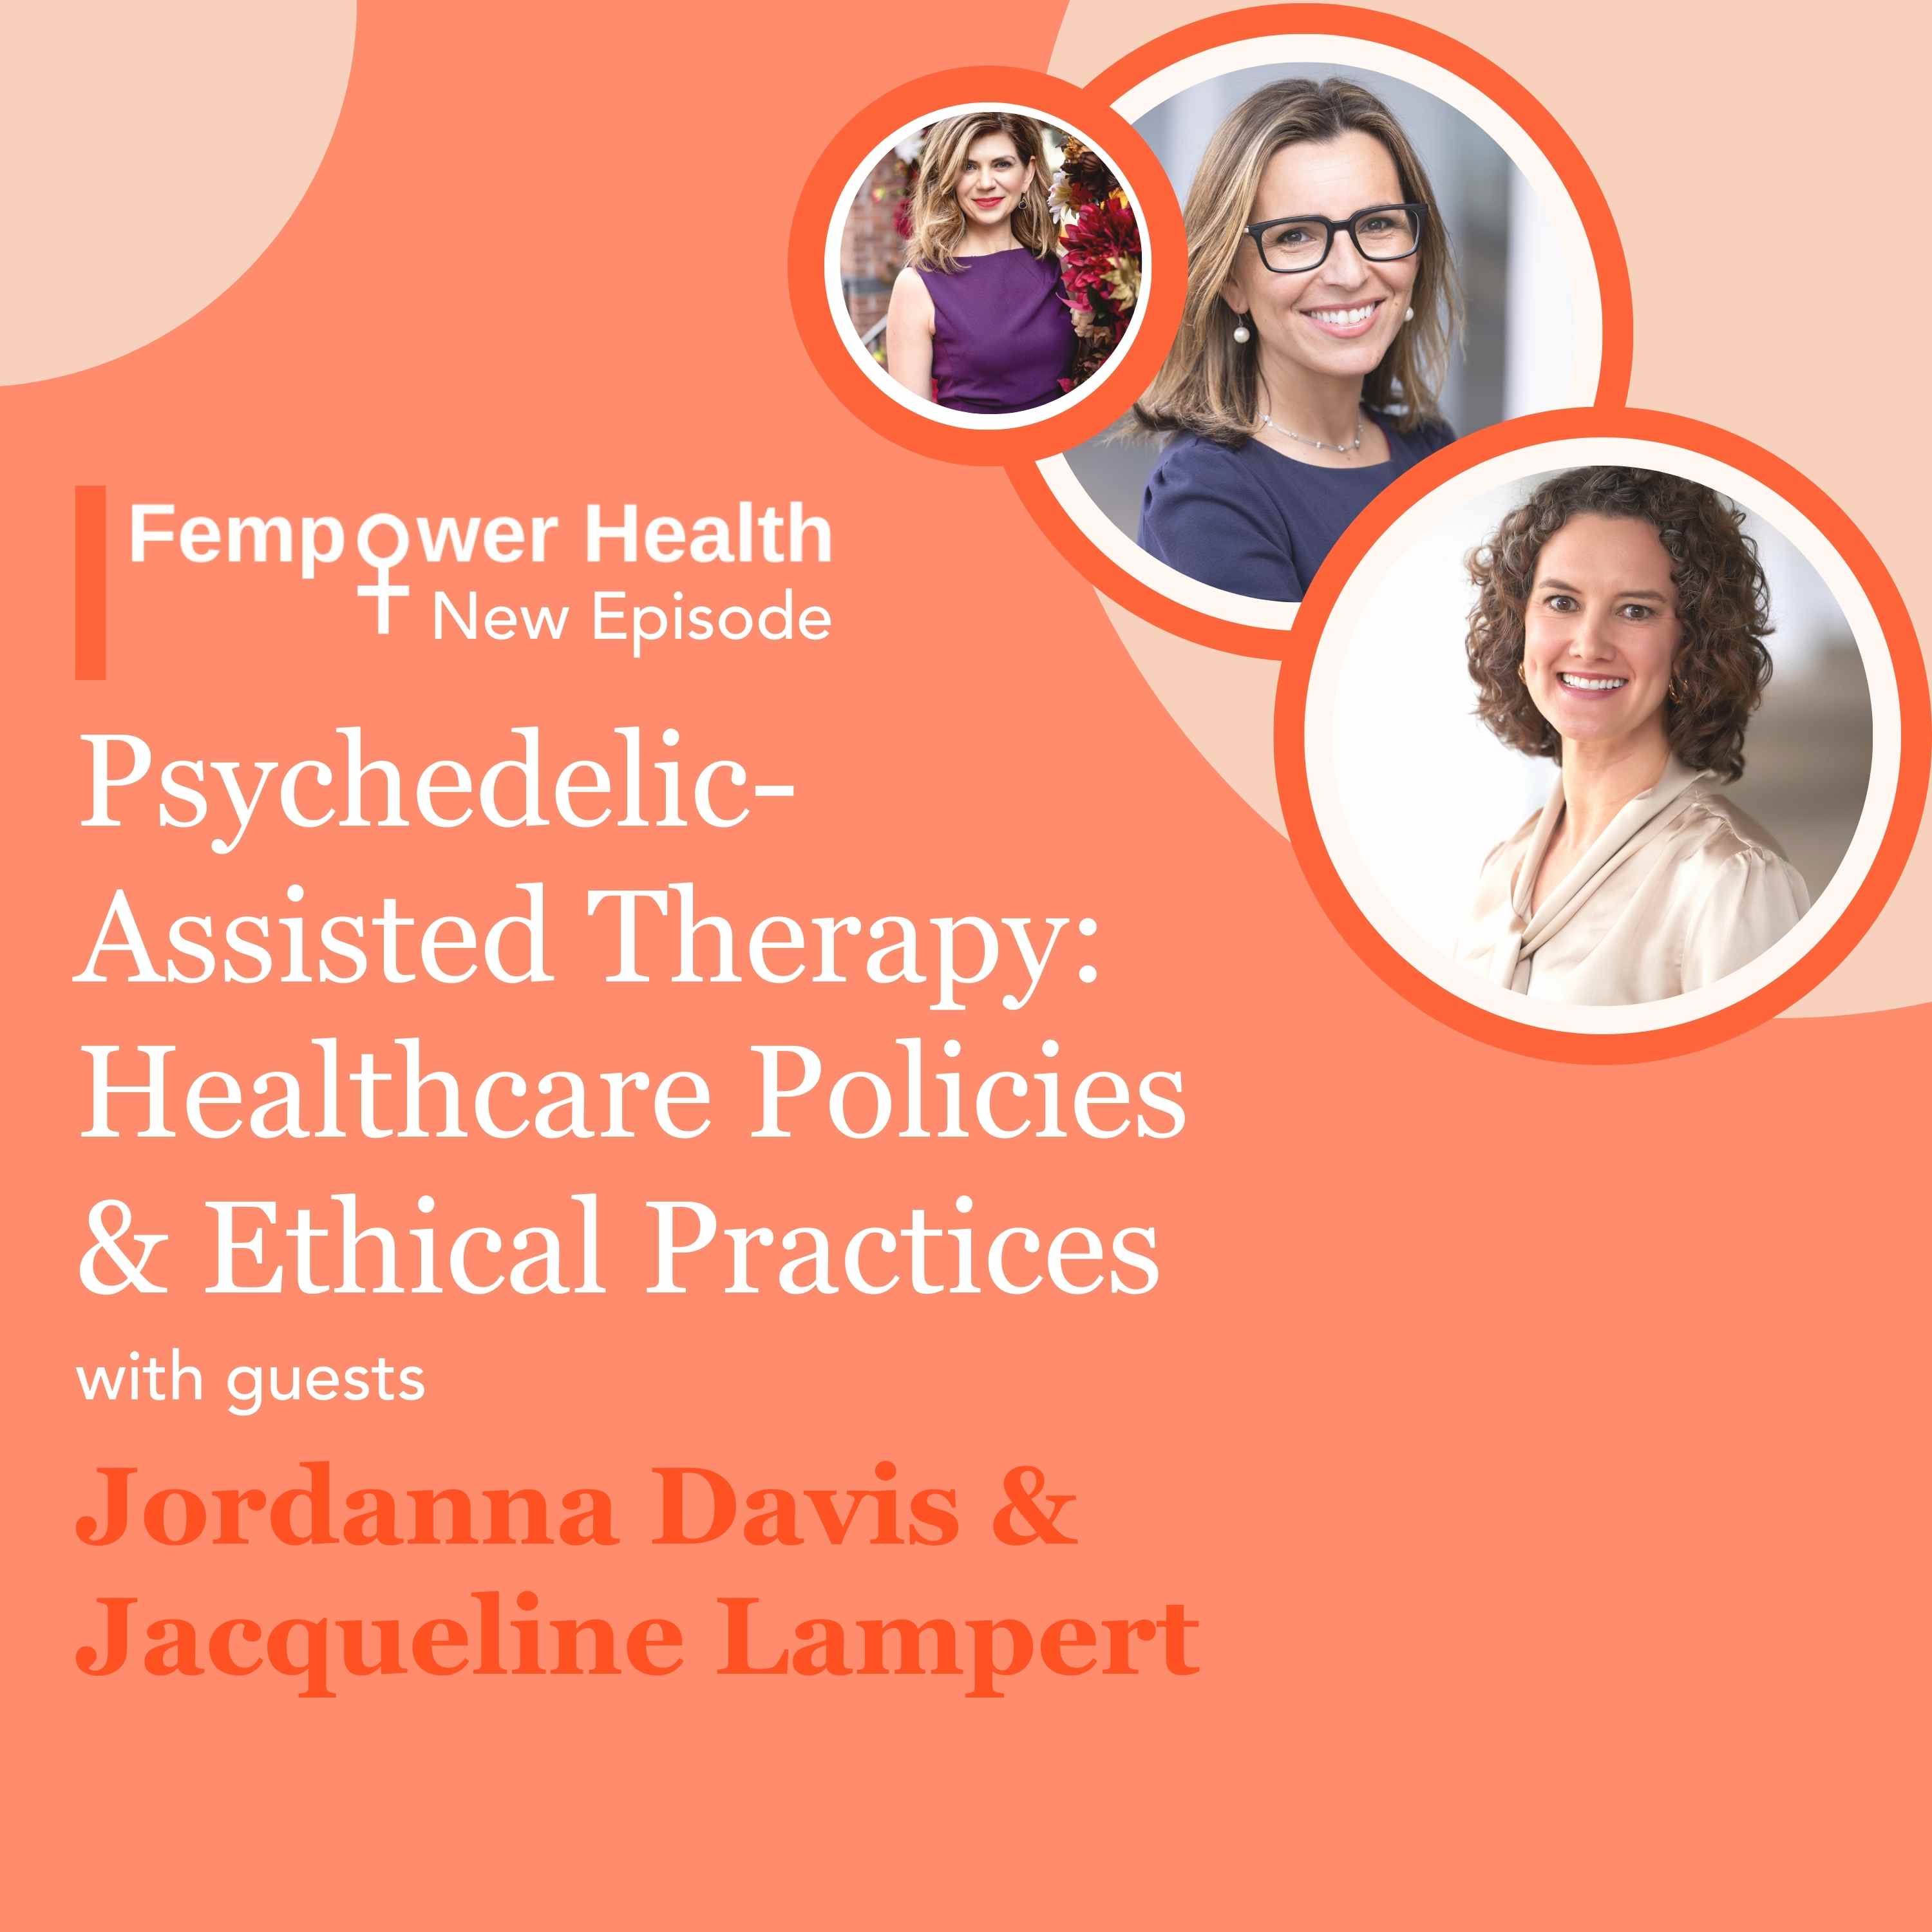 Psychedelic-Assisted Therapy: Healthcare Policies and Ethical Practices | Jordanna Davis & Jacqueline Lampert